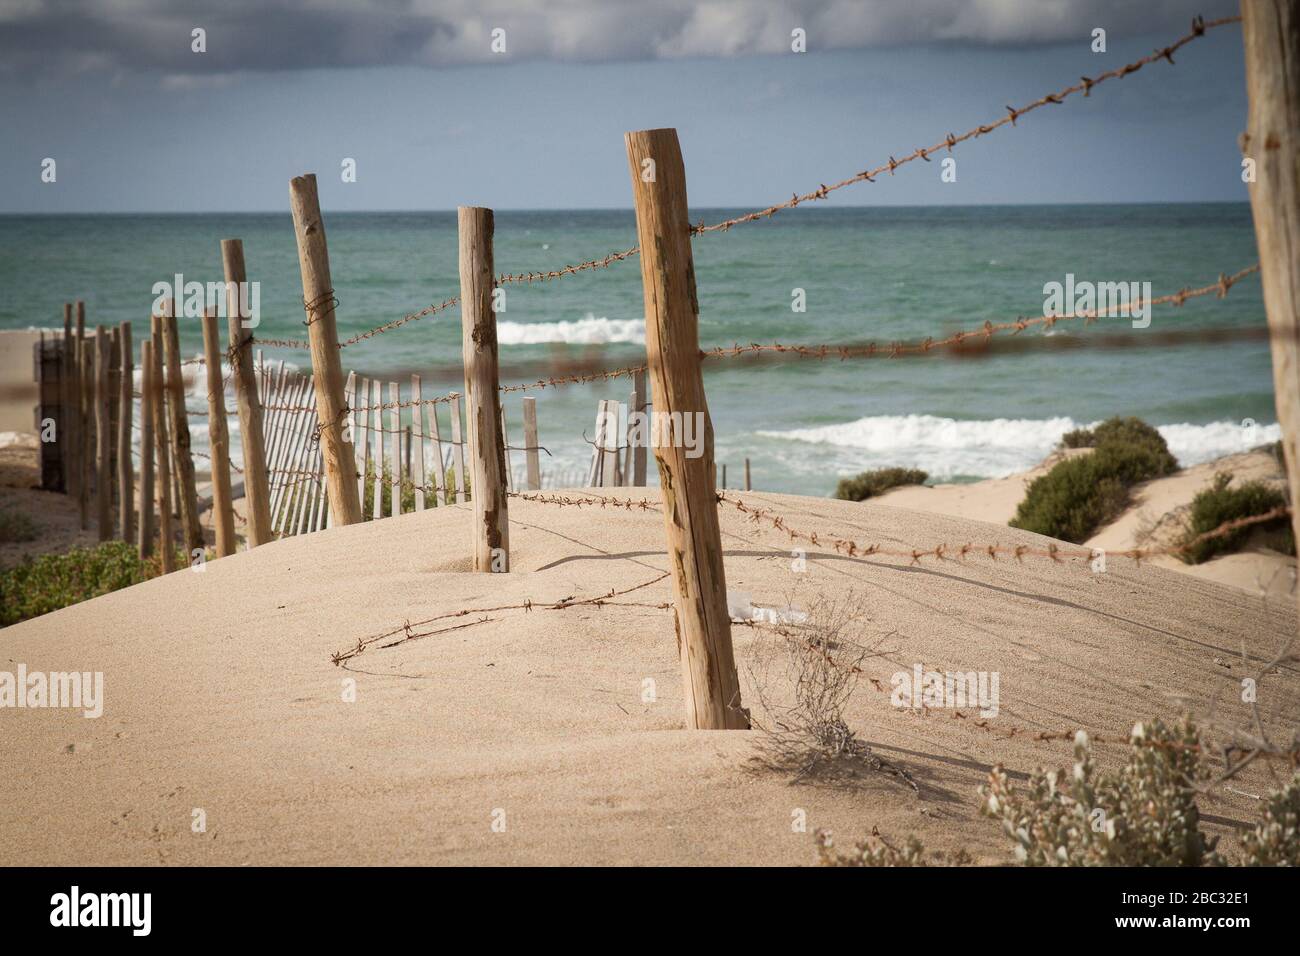 Fence posts held together with barbed wire stick out of a sand dune overlooking the Sea of Cortez near Puerto Penasco, Sonora, Mexico. Stock Photo